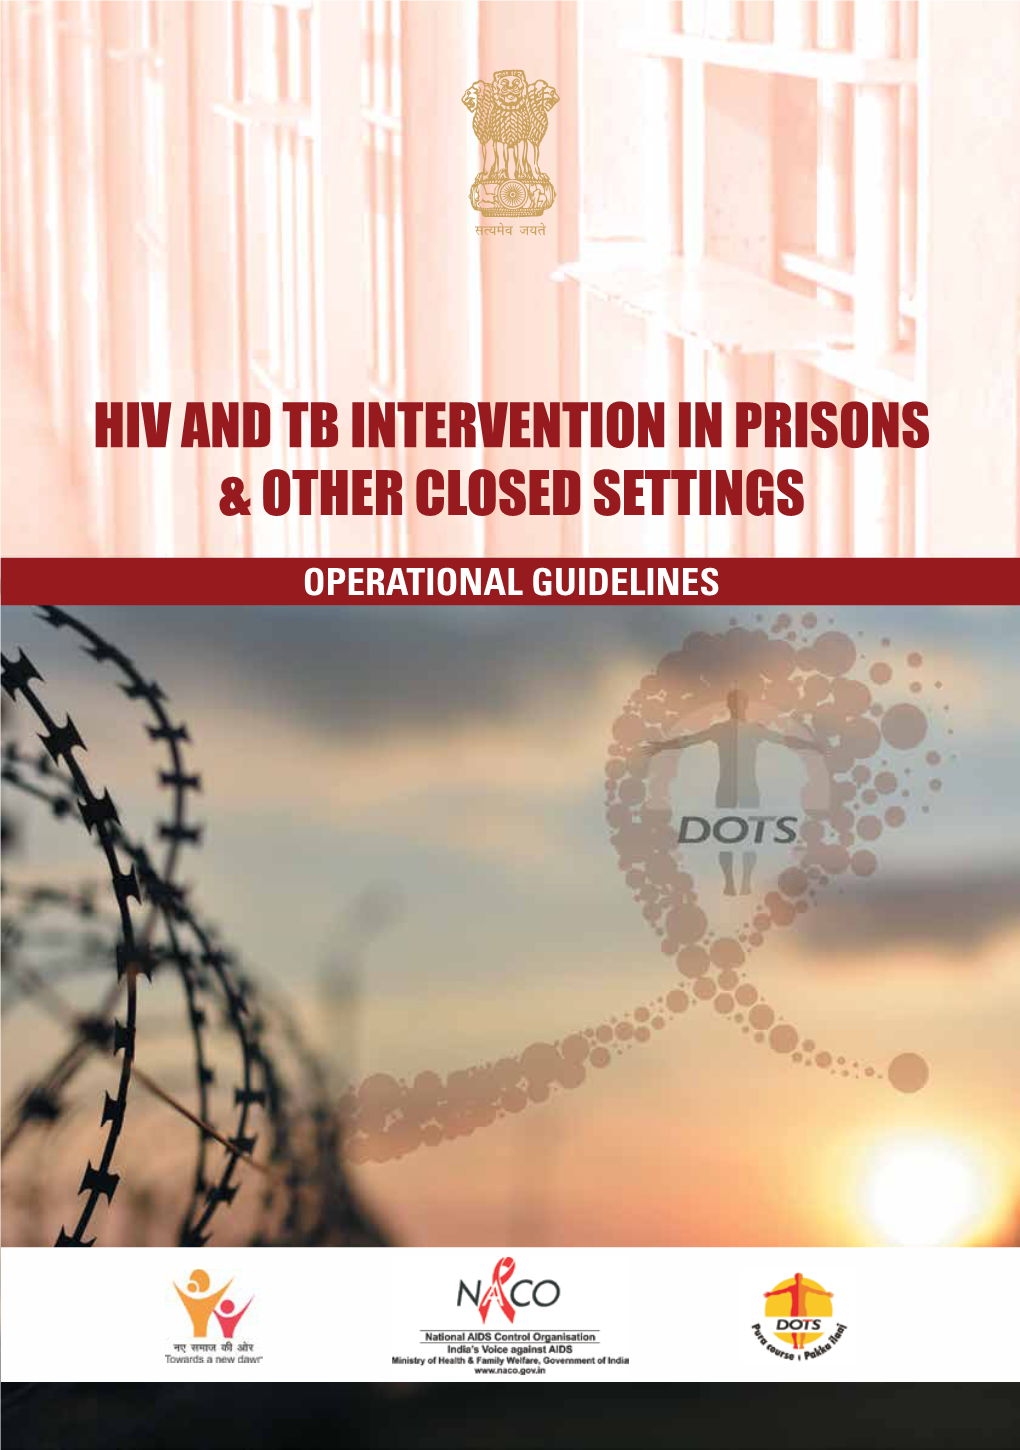 Hiv and Tb Intervention in Prisons & Other Closed Settings Operational Guidelines